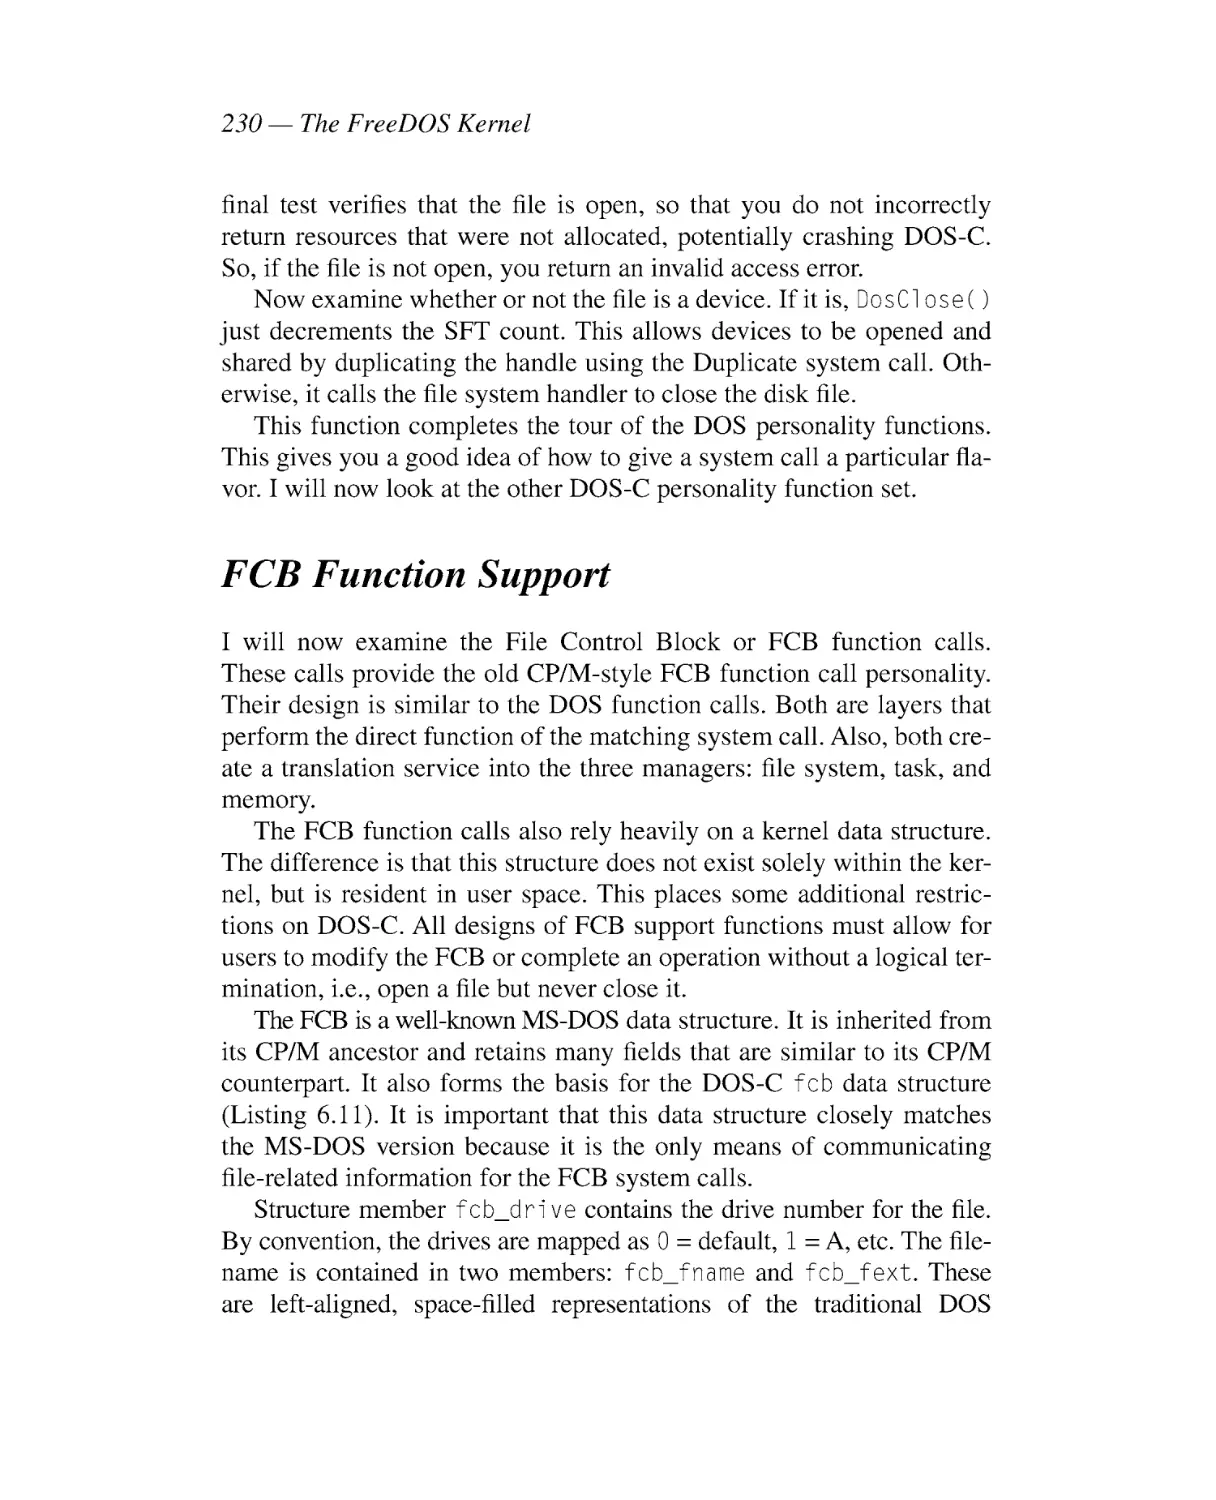 FCB Function Support